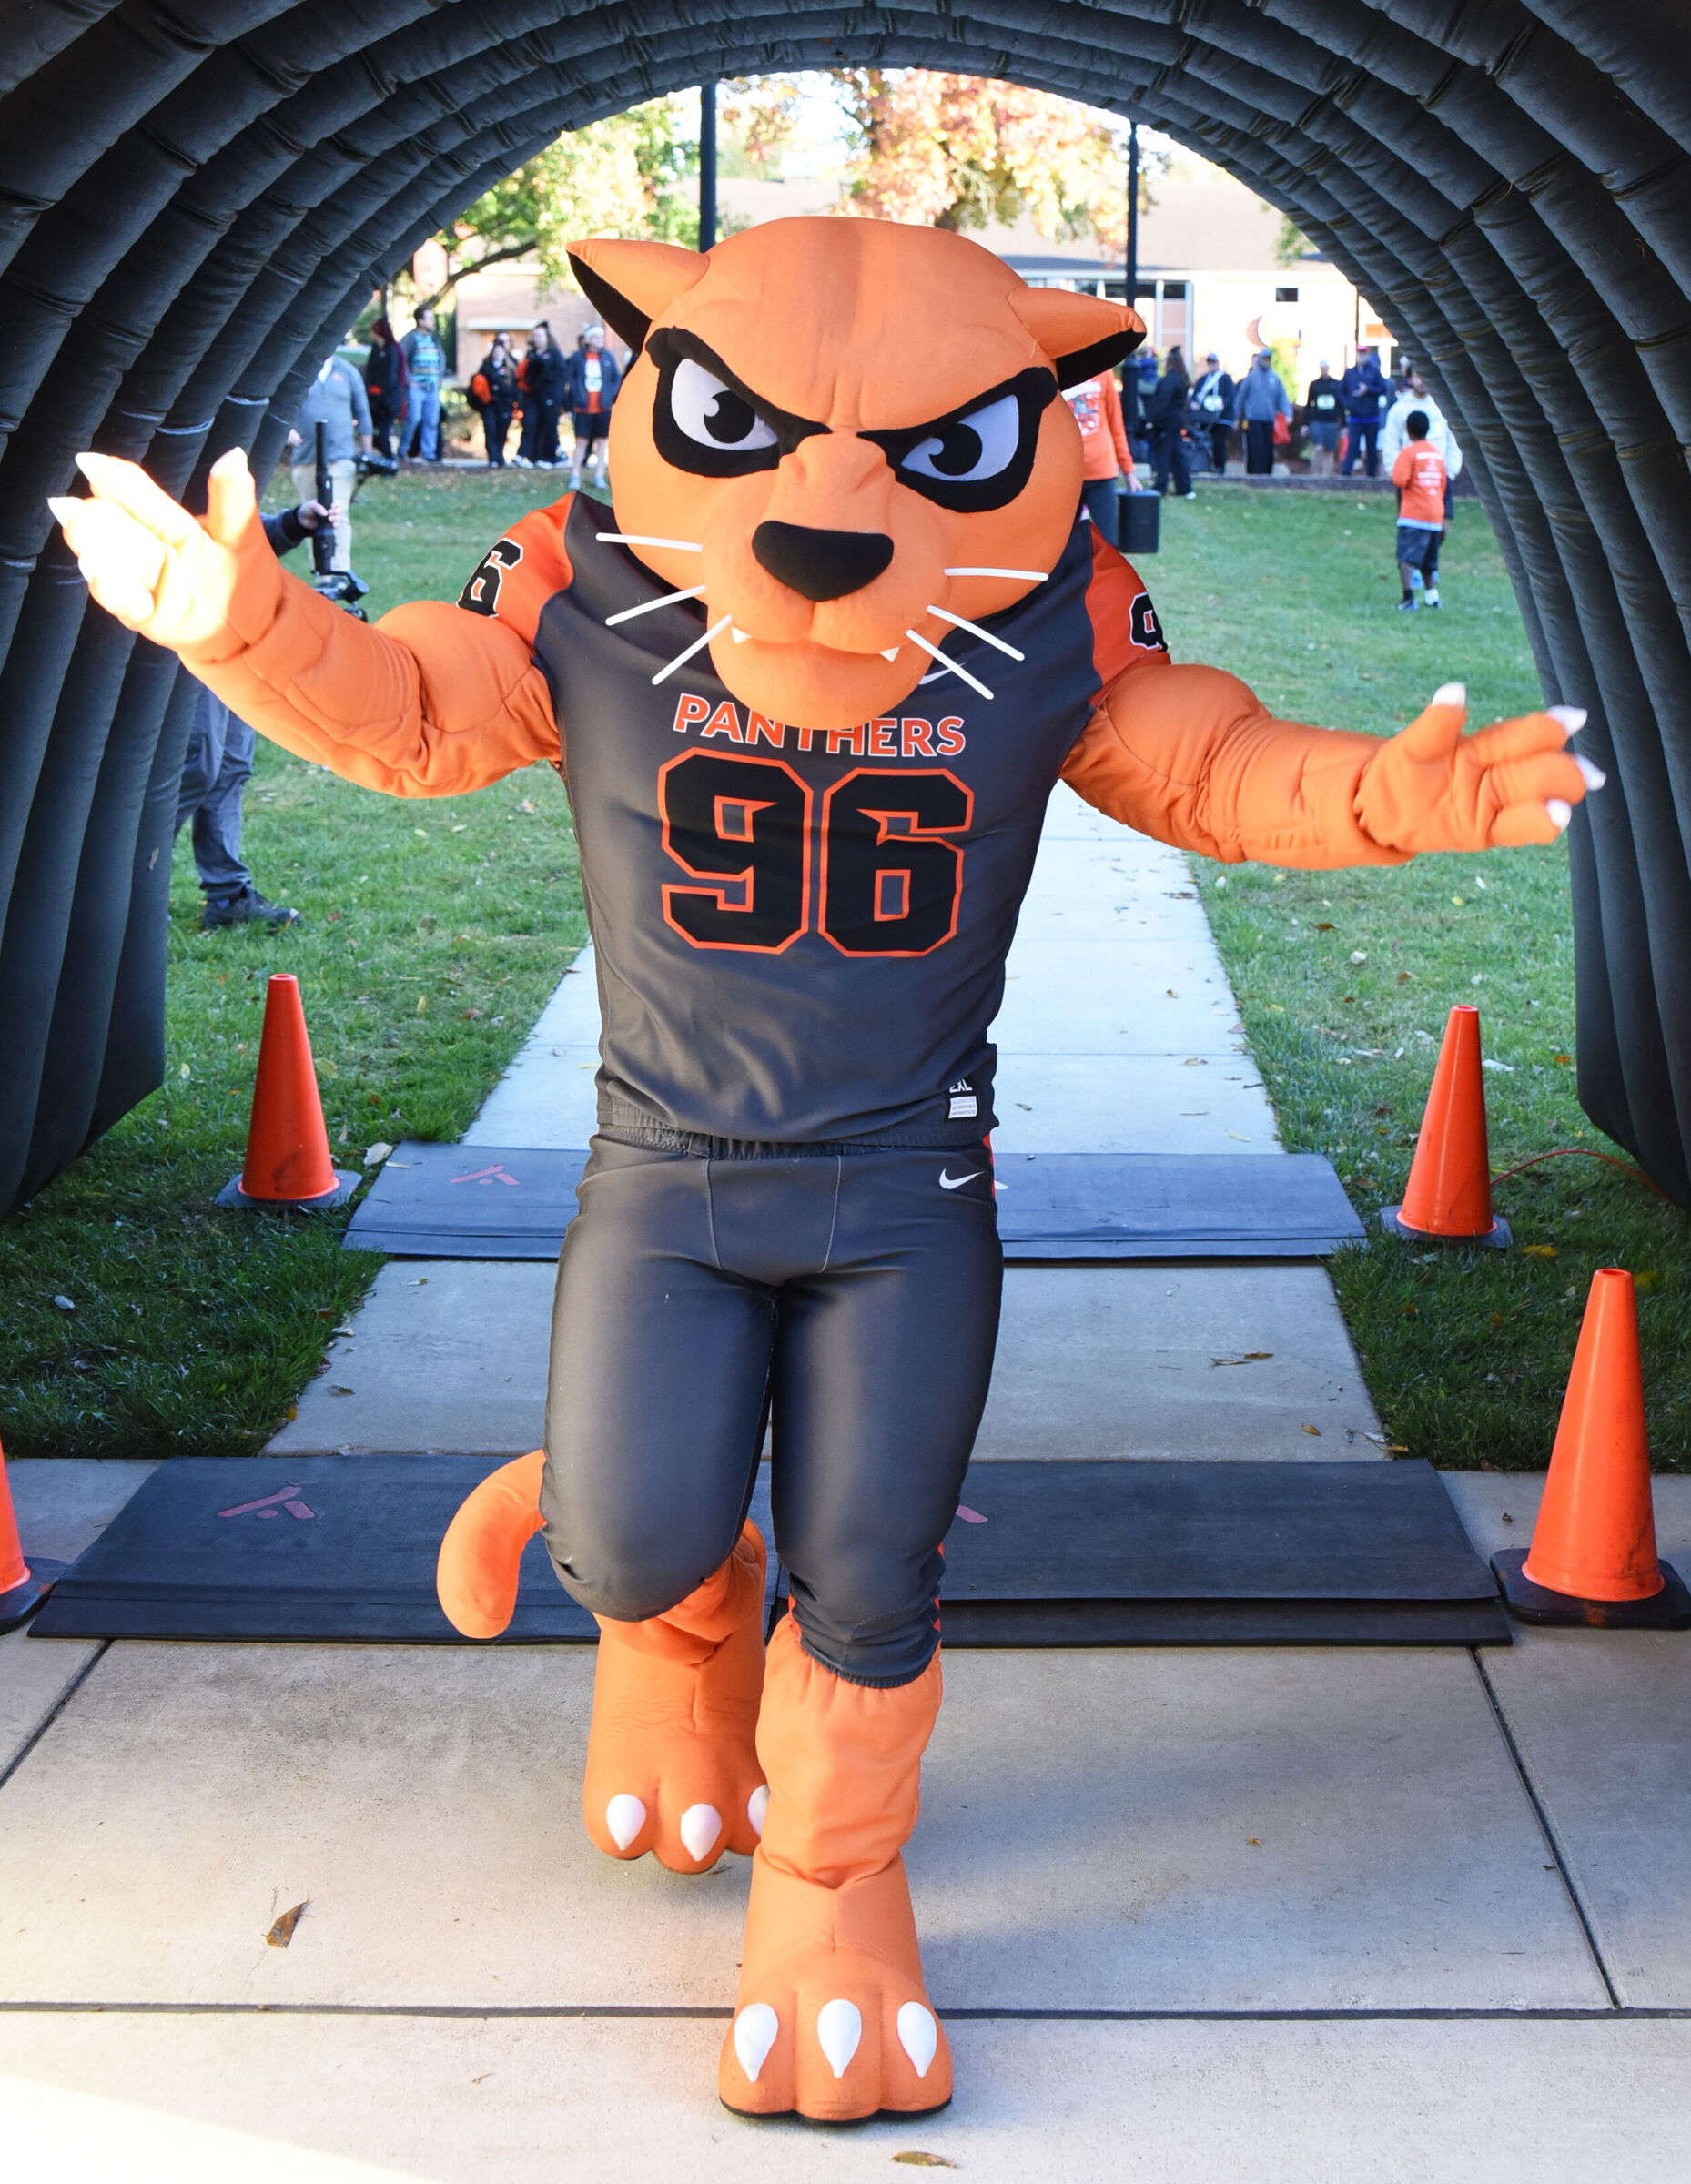 Greenville University alums gather for homecoming celebration